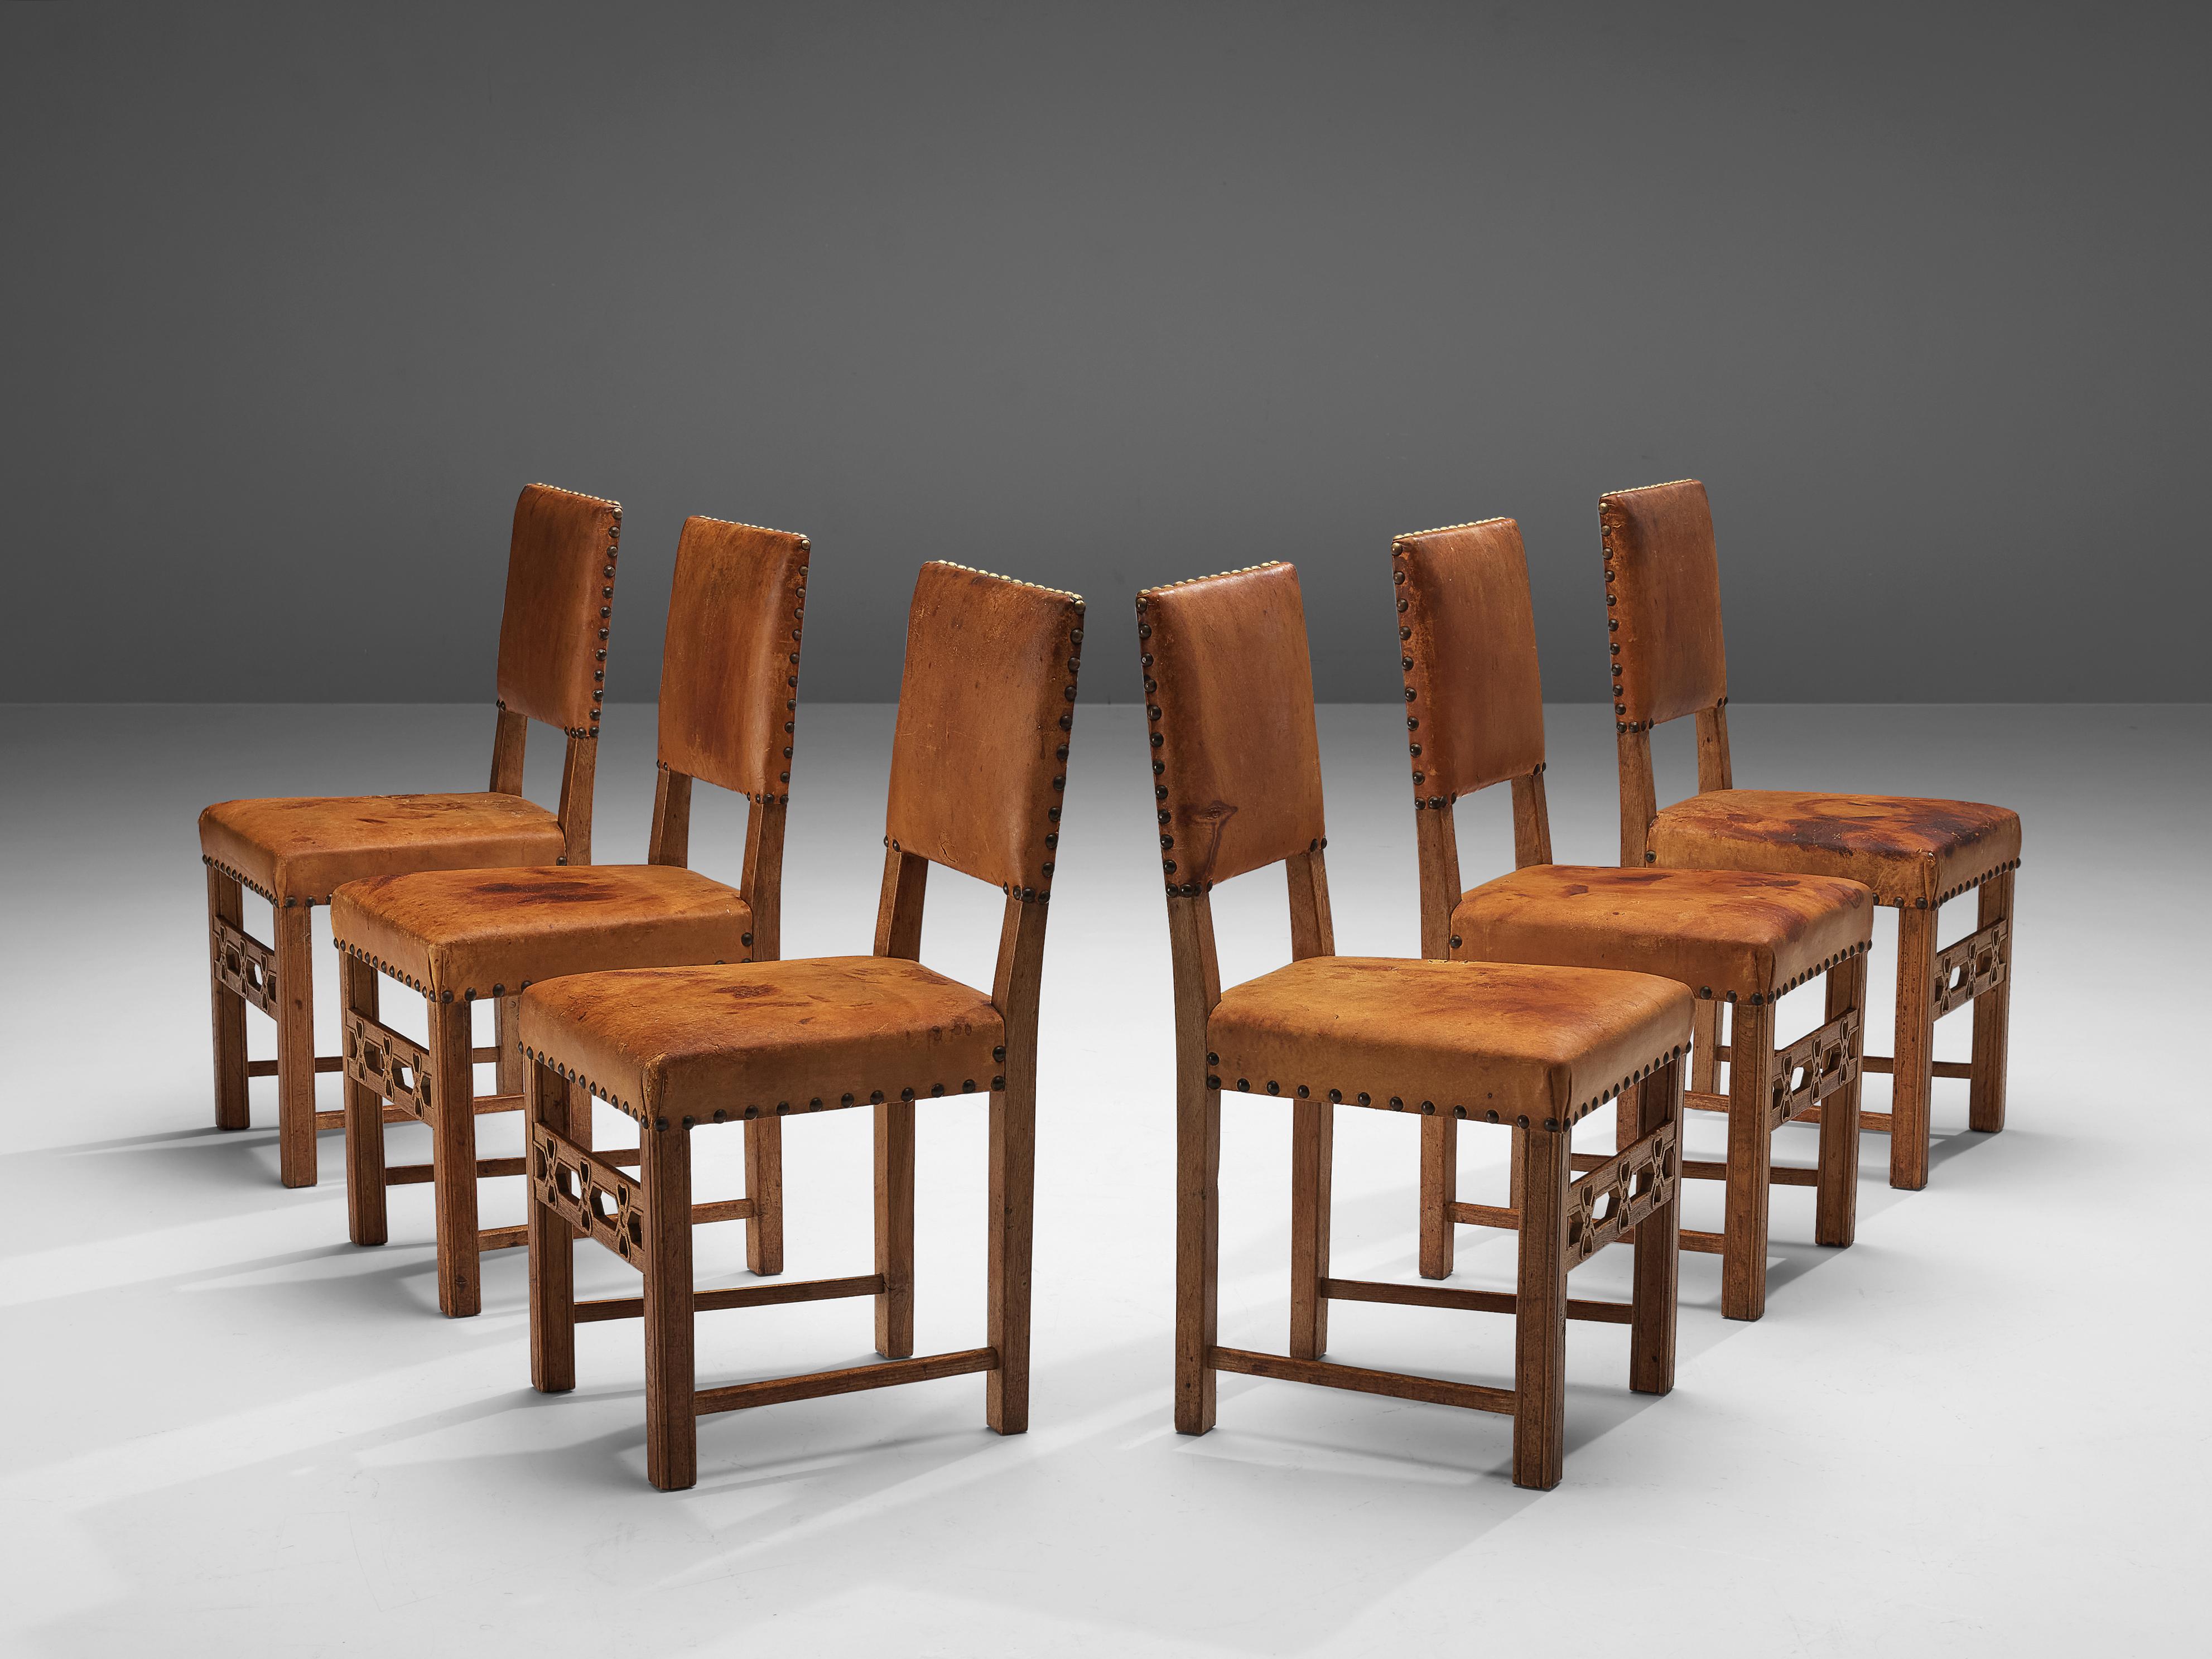 Set of six dining chairs, oak, patinated, leather, Sweden, 1940s

Set of six elegant dining chairs in oak and expressive patinated cognac leather. The leather is fixed to the frame with big brass nails which add an art deco appeal to the design.